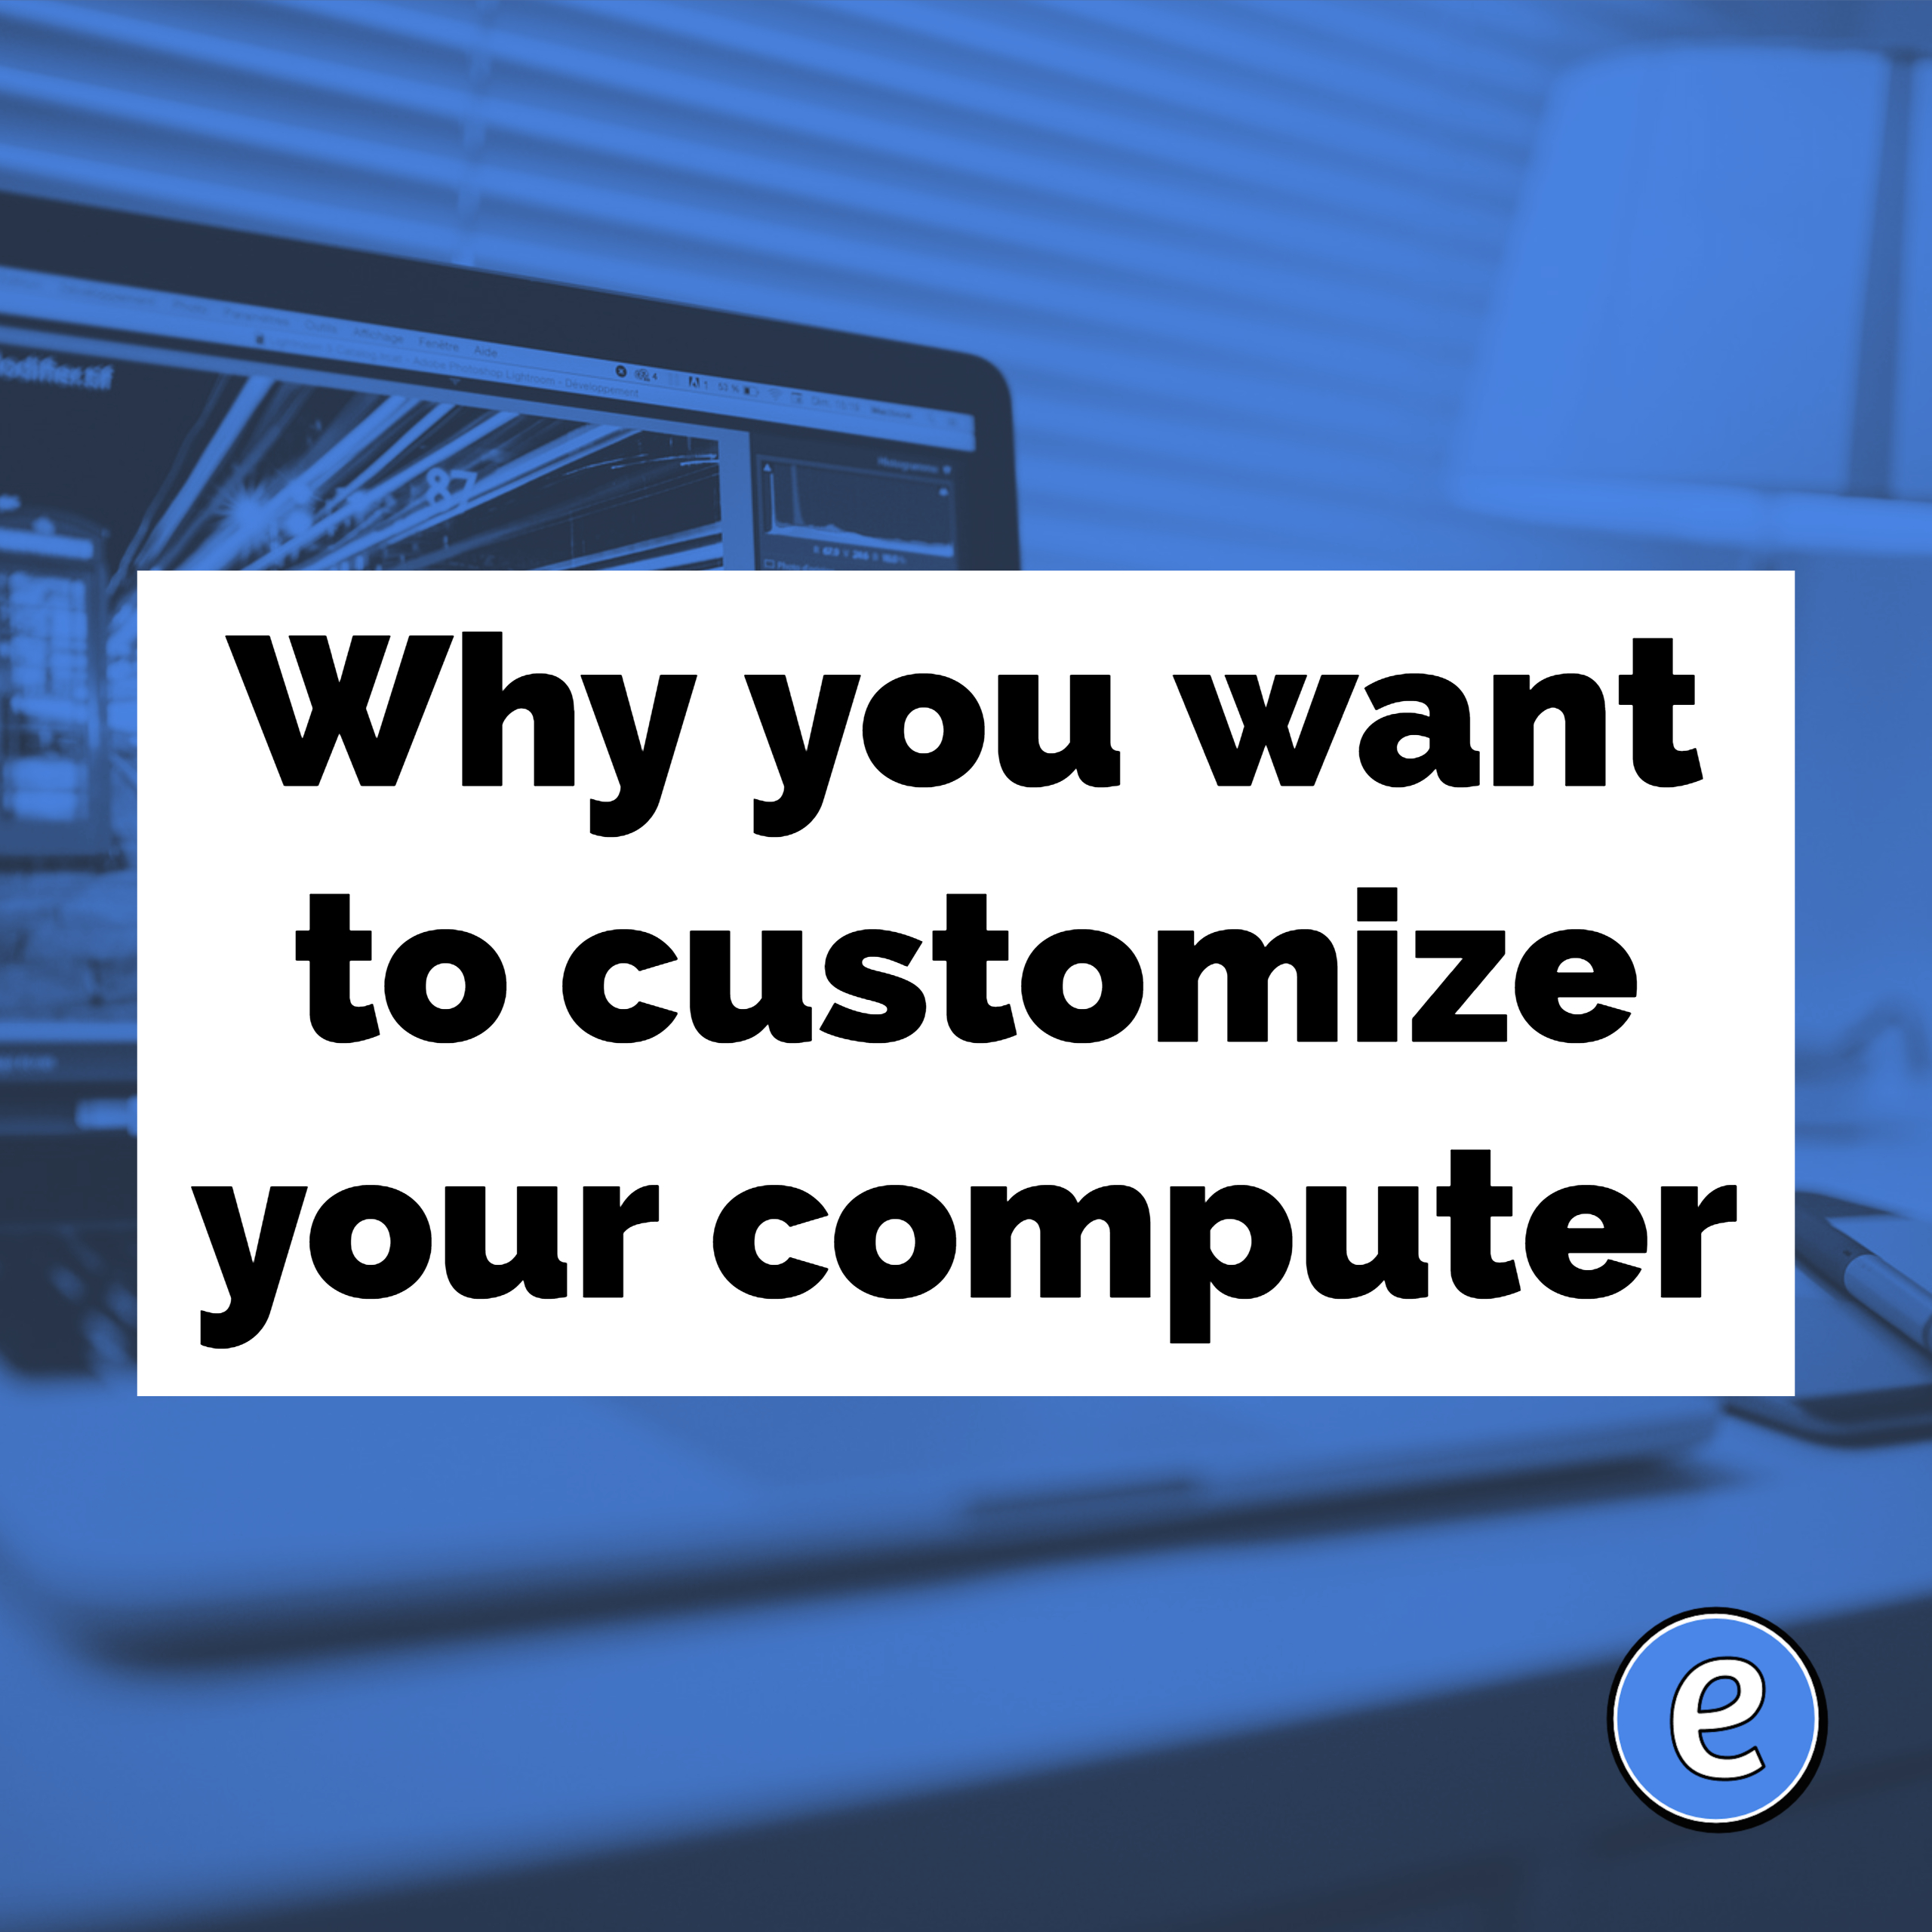 Why you want to customize your computer